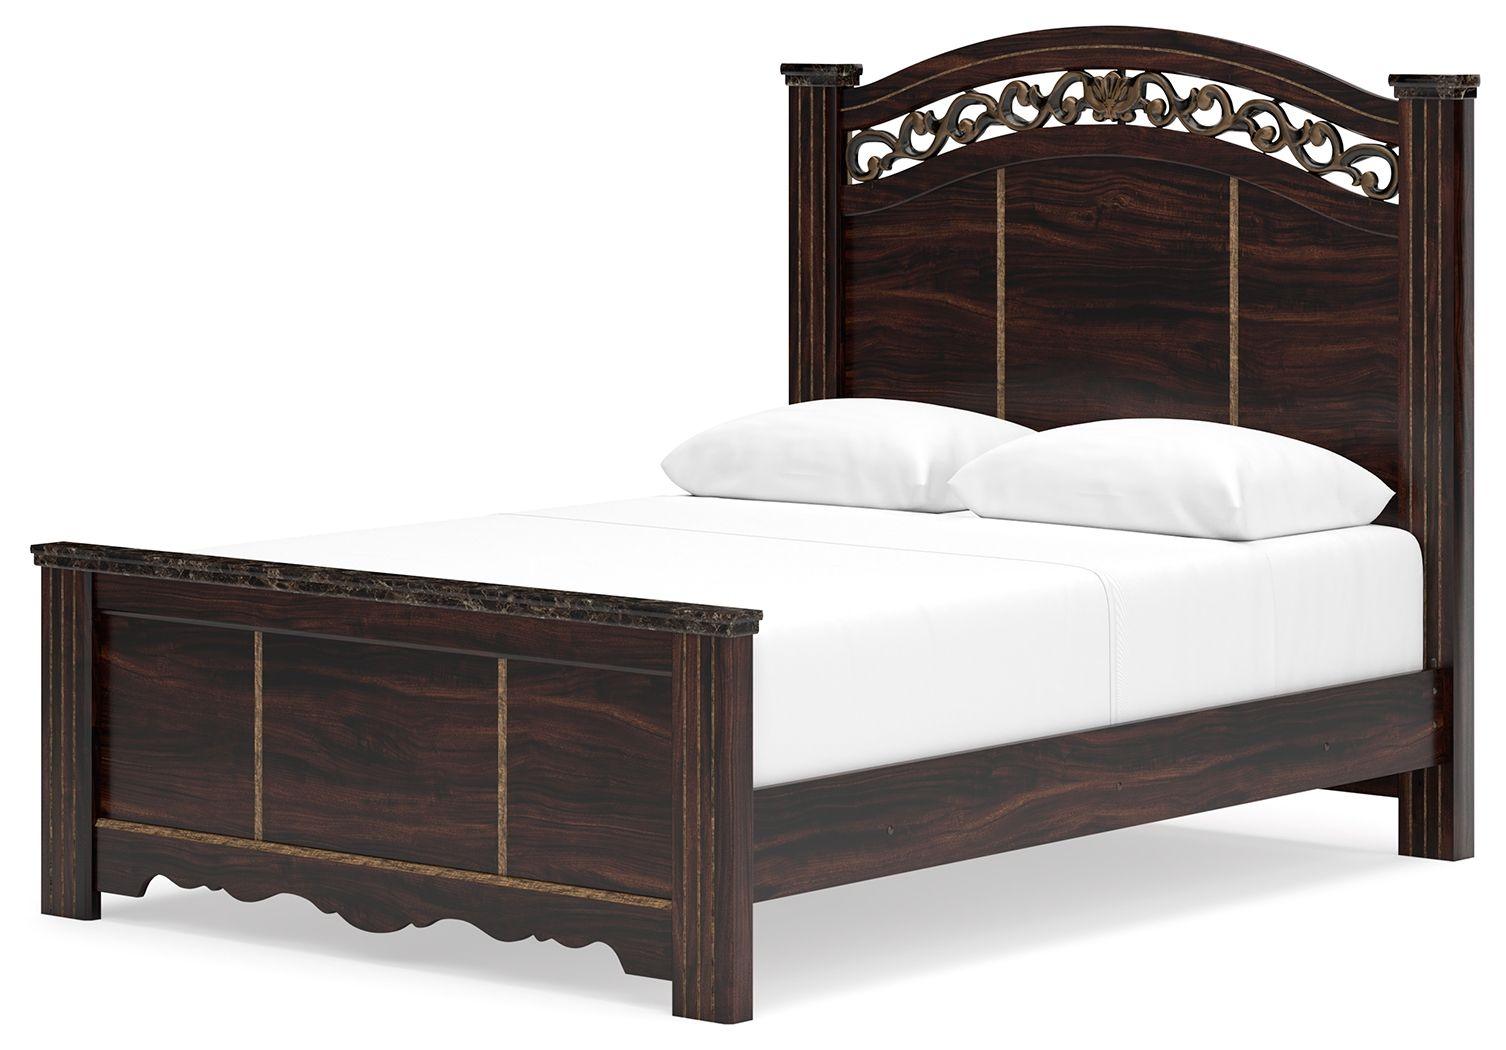 Signature Design by Ashley® - Glosmount - Poster Bedroom Set - 5th Avenue Furniture